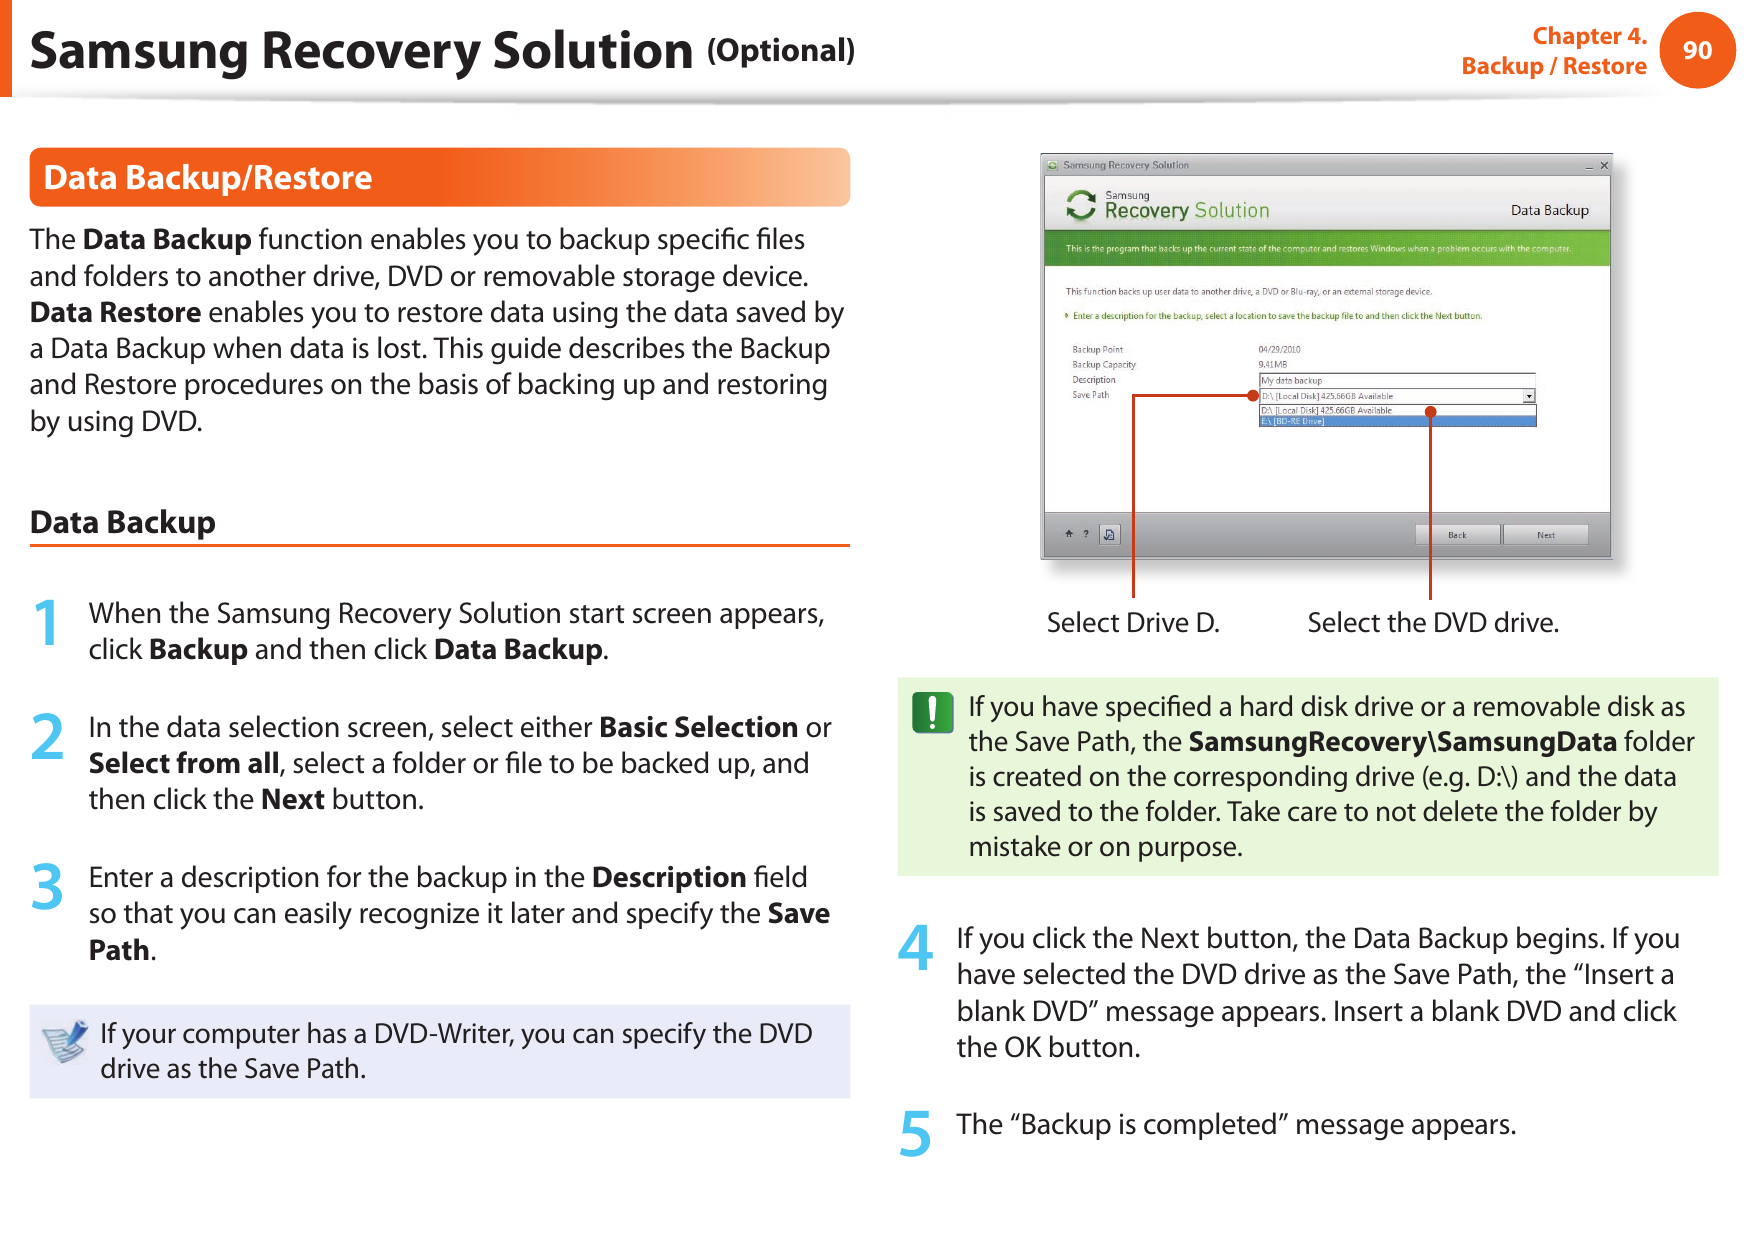 90Chapter 4.  Backup / RestoreData Backup/RestoreThe Data Backup function enables you to backup speci c  les and folders to another drive, DVD or removable storage device. Data Restore enables you to restore data using the data saved by a Data Backup when data is lost. This guide describes the Backup and Restore procedures on the basis of backing up and restoring by using DVD.Data Backup1  When the Samsung Recovery Solution start screen appears, click Backup and then click Data Backup.2  In the data selection screen, select either Basic Selection or Select from all, select a folder or  le to be backed up, and then click the Next button.3  Enter a description for the backup in the Description  eld so that you can easily recognize it later and specify the Save Path. If your computer has a DVD-Writer, you can specify the DVD drive as the Save Path.Select Drive D. Select the DVD drive.If you have speci ed a hard disk drive or a removable disk as the Save Path, the SamsungRecovery\SamsungData folder is created on the corresponding drive (e.g. D:\) and the data is saved to the folder. Take care to not delete the folder by mistake or on purpose.4  If you click the Next button, the Data Backup begins. If you have selected the DVD drive as the Save Path, the “Insert a blank DVD” message appears. Insert a blank DVD and click the OK button.5  The “Backup is completed” message appears.Samsung Recovery Solution (Optional)